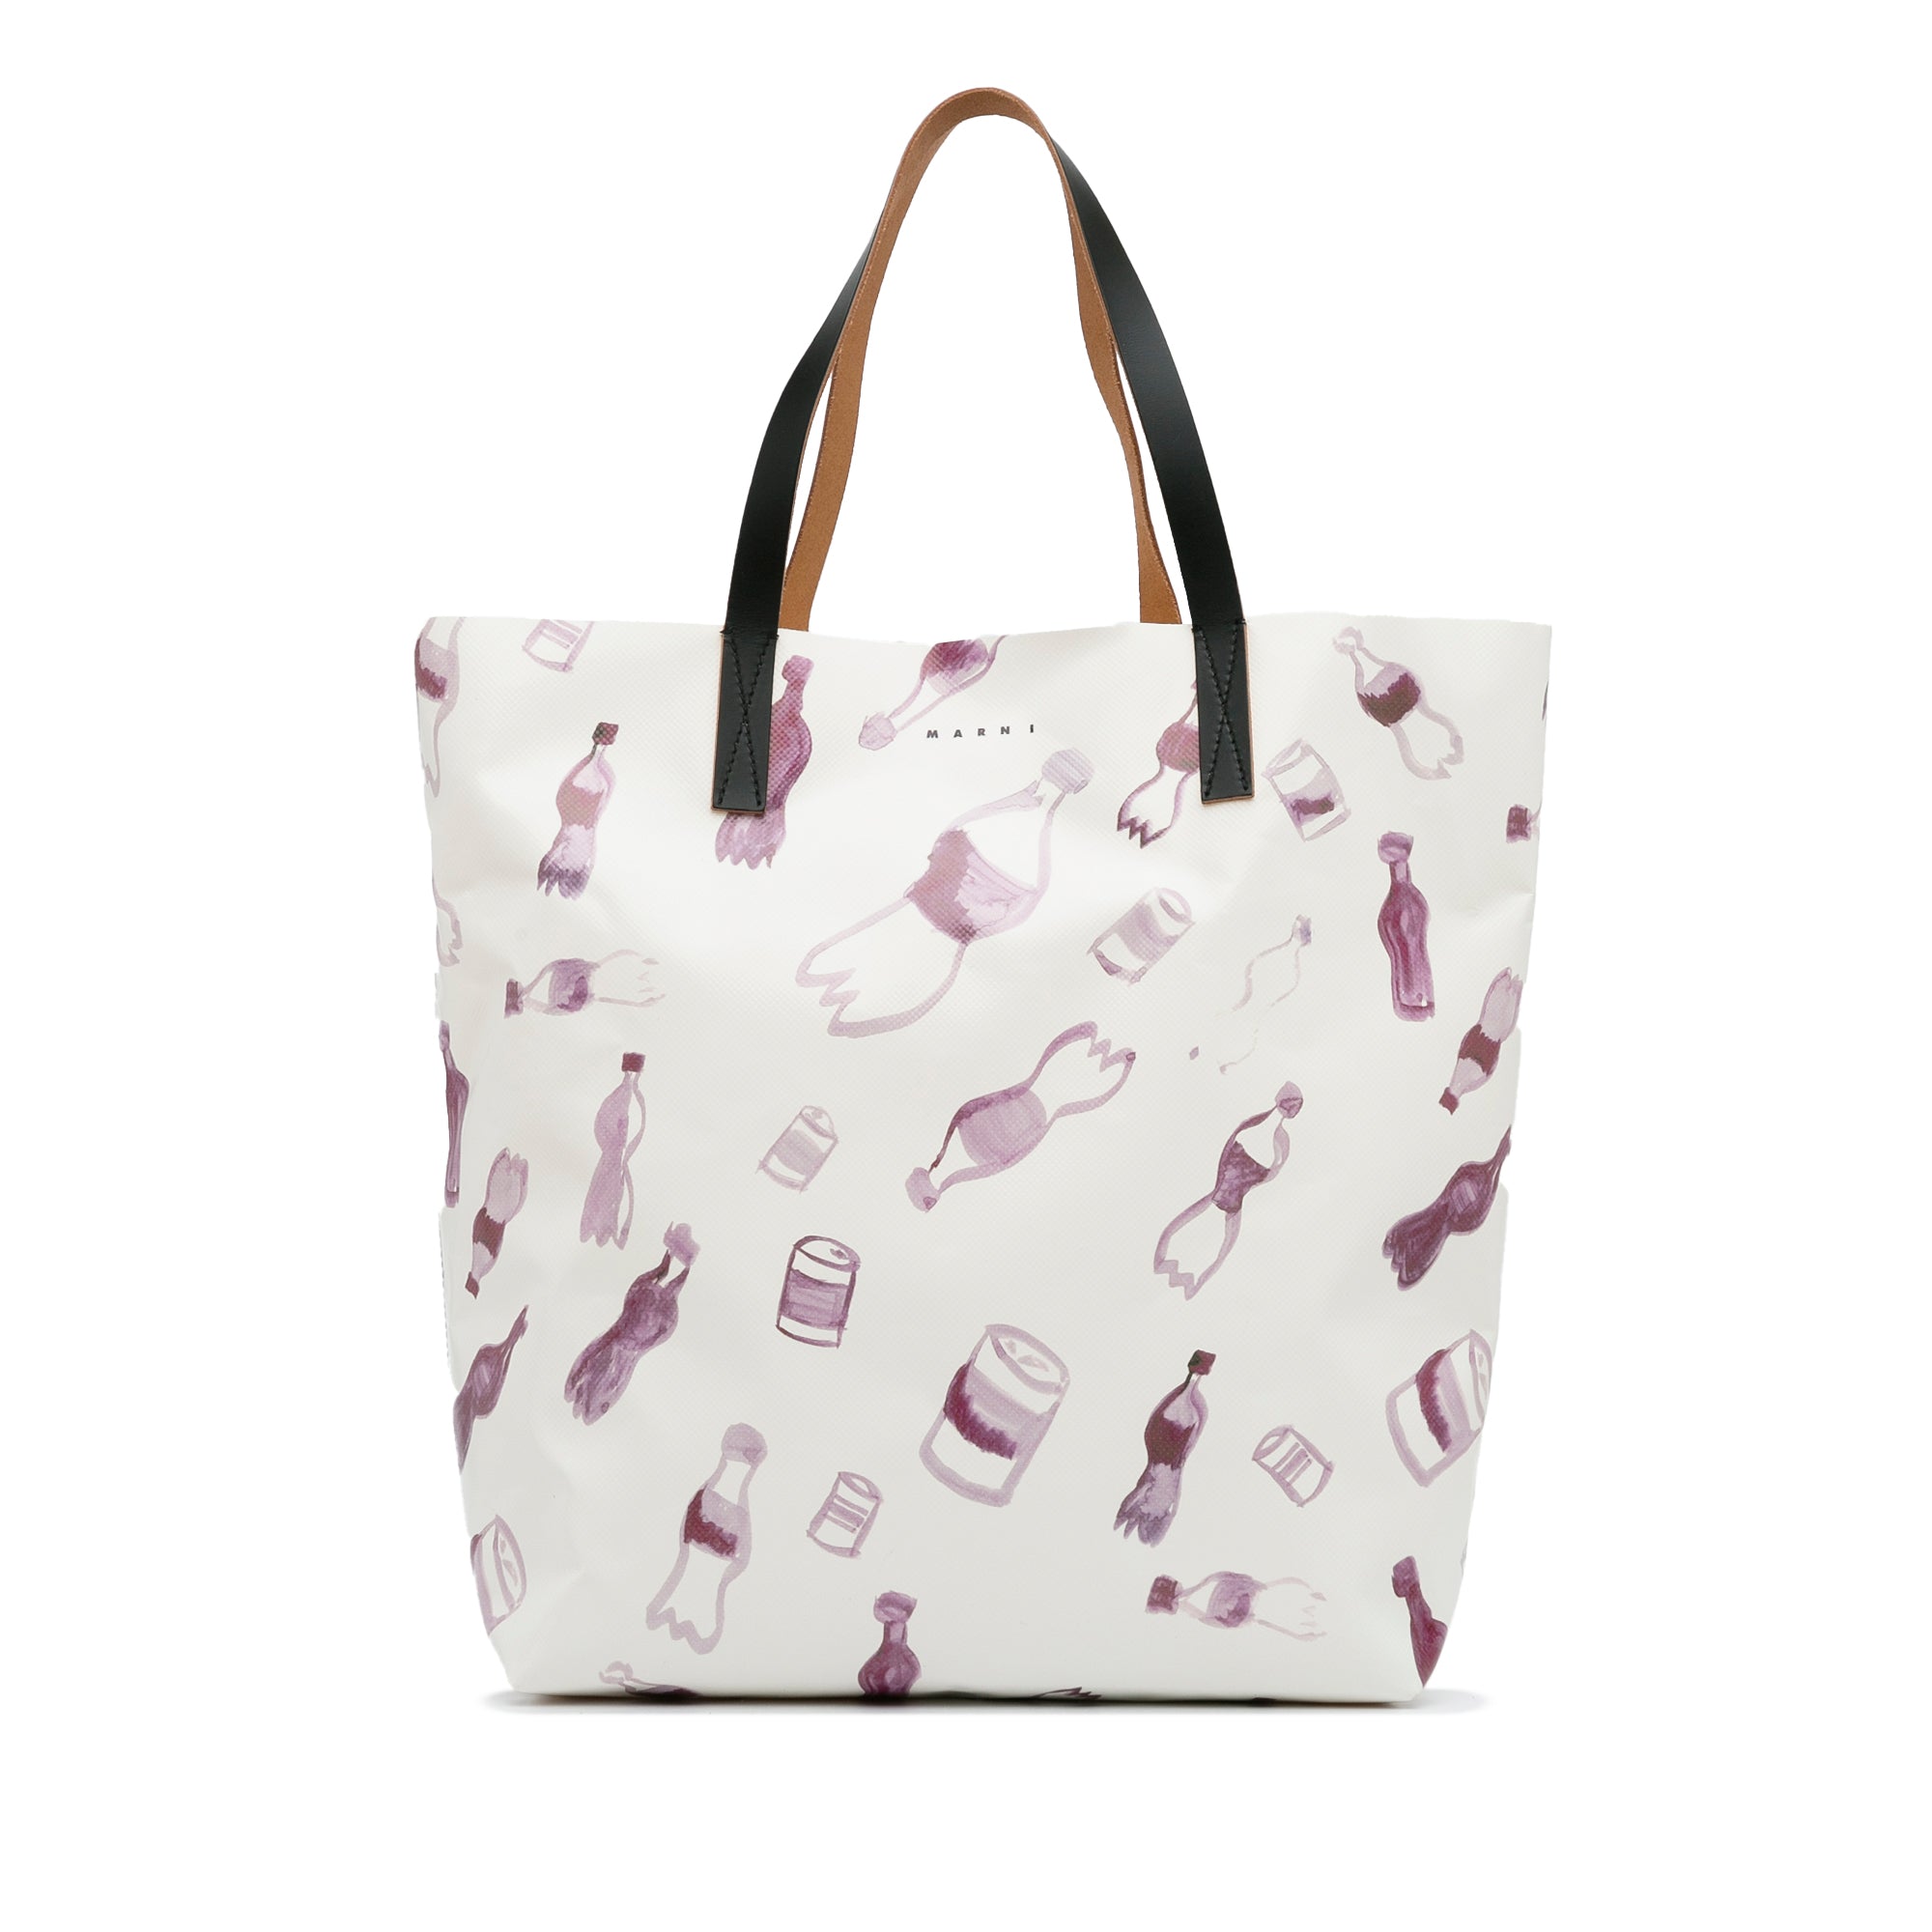 GIVENCHY Floral Print Coated Canvas Tote